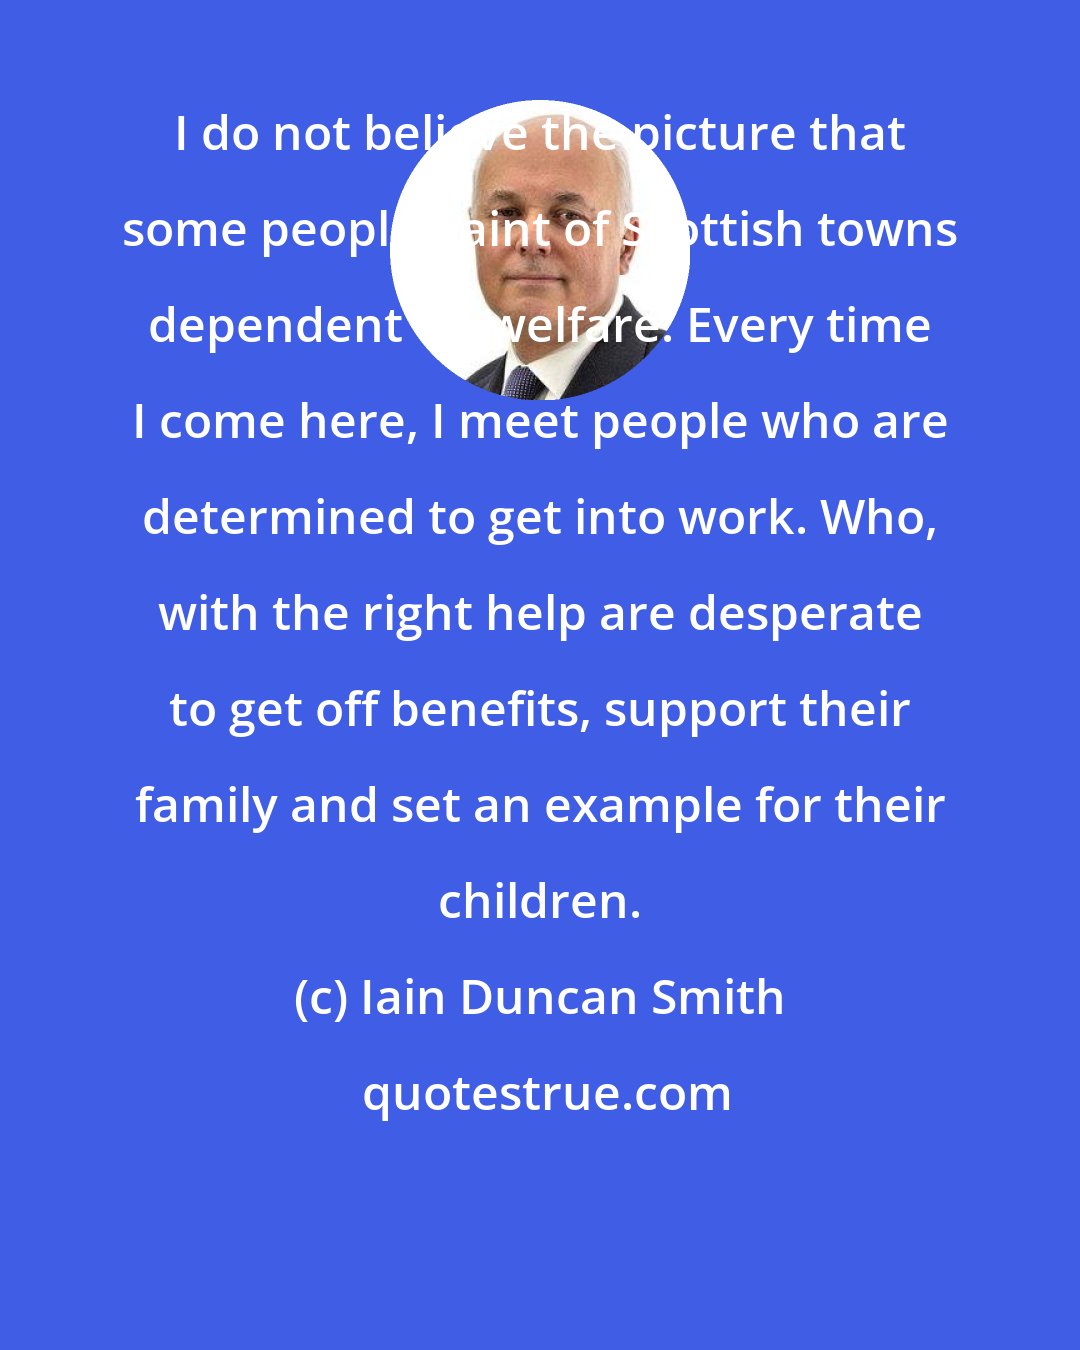 Iain Duncan Smith: I do not believe the picture that some people paint of Scottish towns dependent on welfare. Every time I come here, I meet people who are determined to get into work. Who, with the right help are desperate to get off benefits, support their family and set an example for their children.